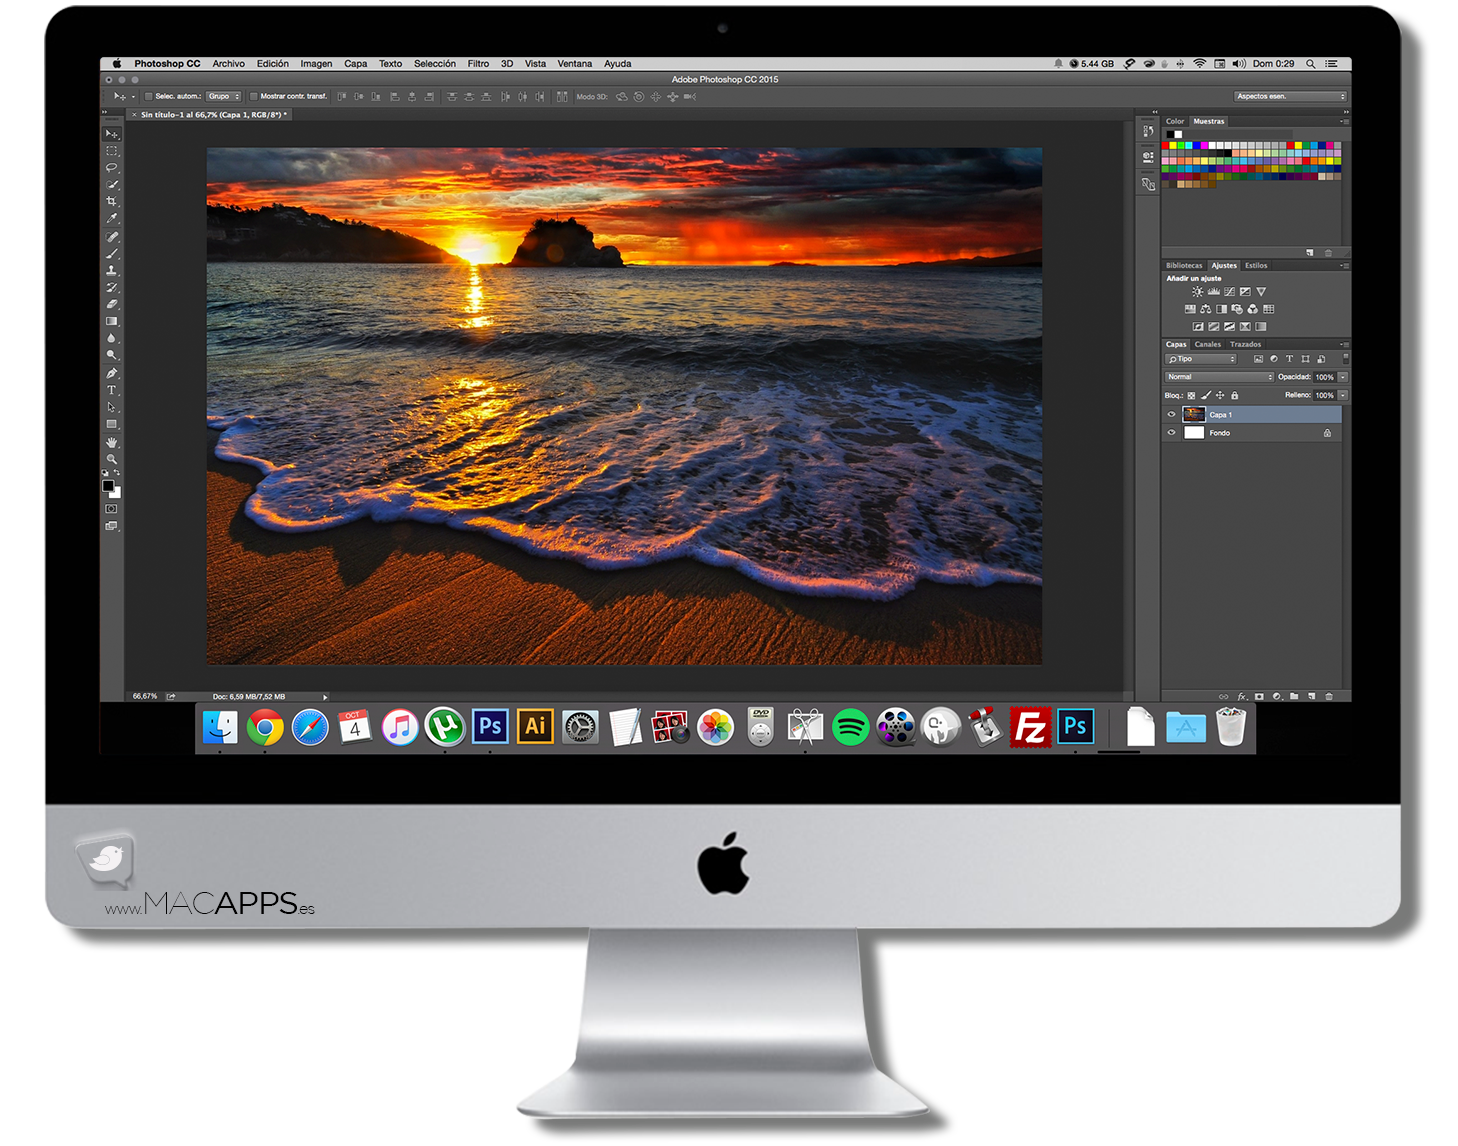 adobe photoshop free download for mac os x 10.10